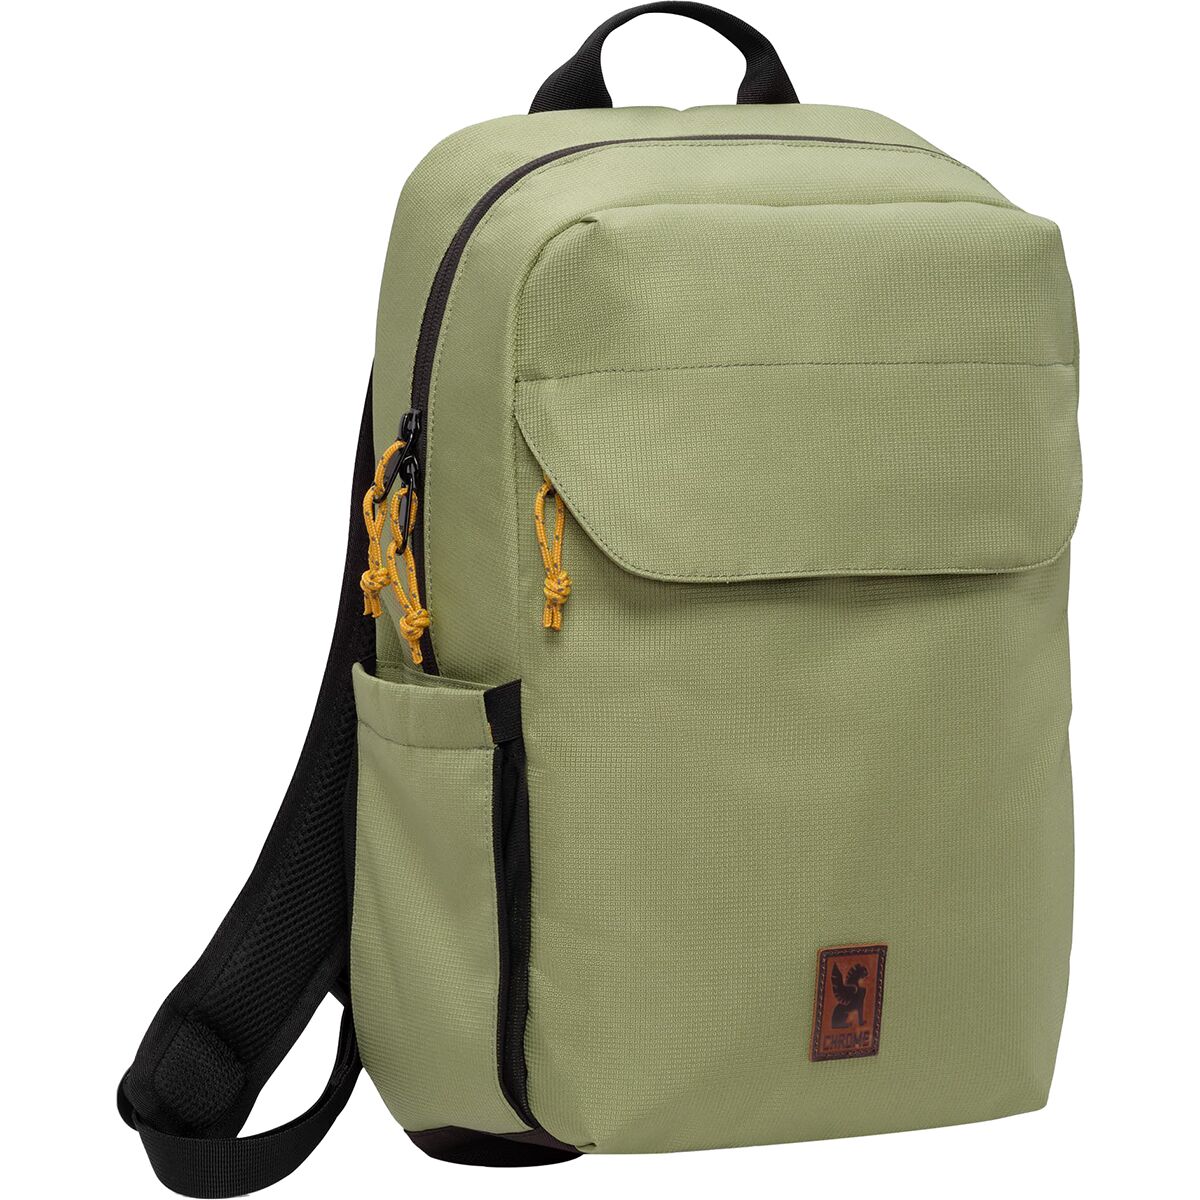 Chrome Ruckas 14L Backpack Oil Green, One Size